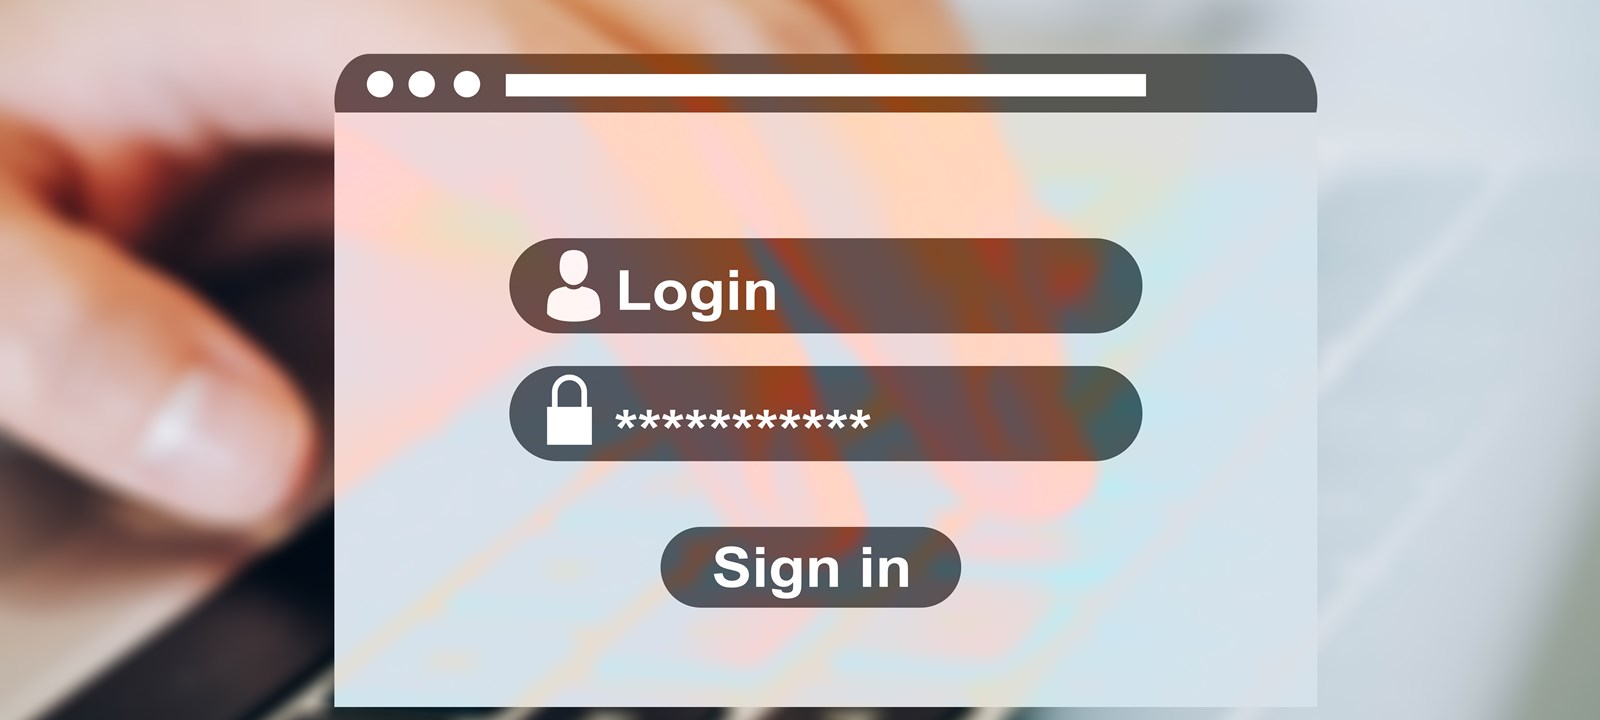 Creating a secure Android login screen with Sitecore and Xamarin